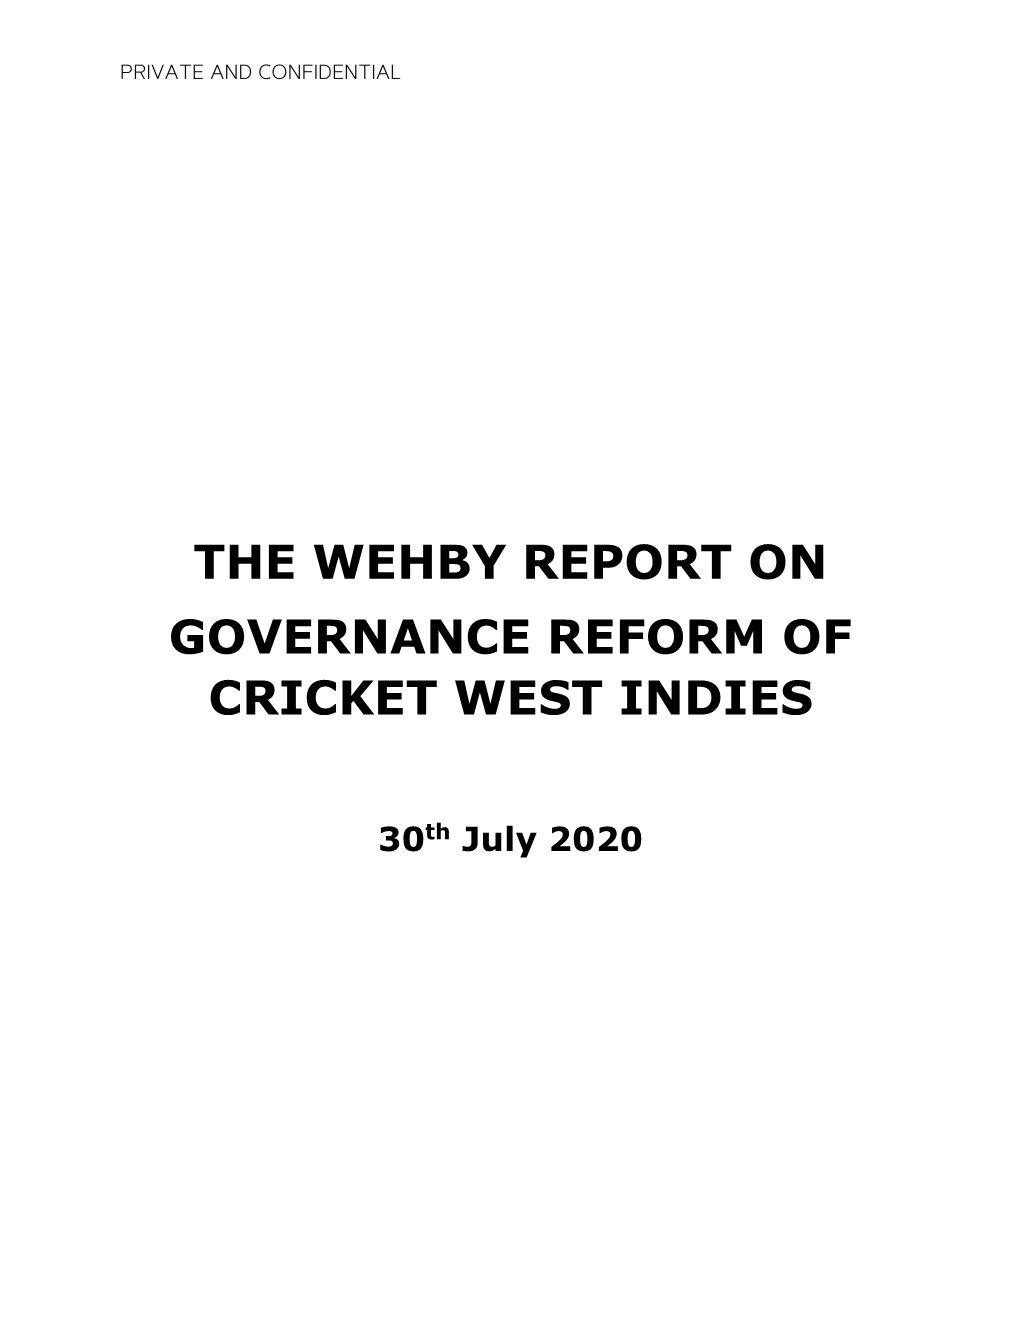 The Wehby Report on Governance Reform of Cricket West Indies